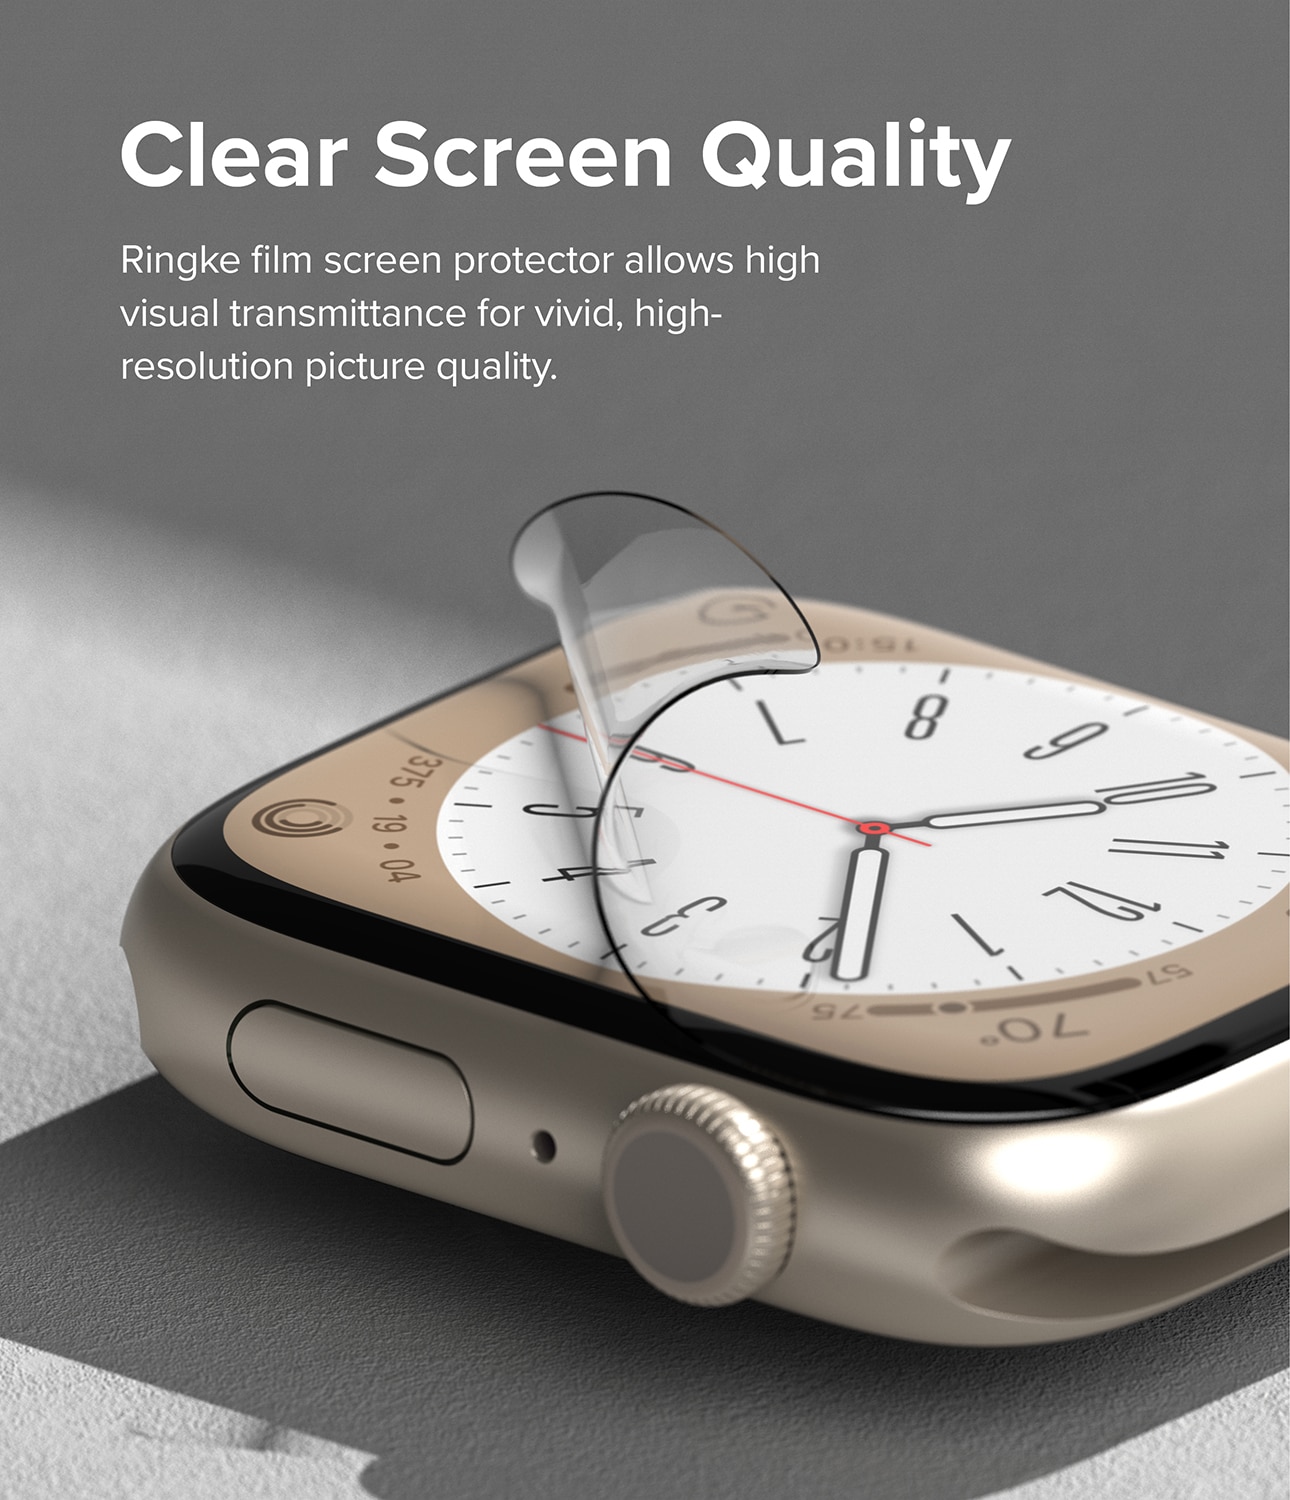 Dual Easy Screen Protector (3-pack) Apple Watch SE 44mm